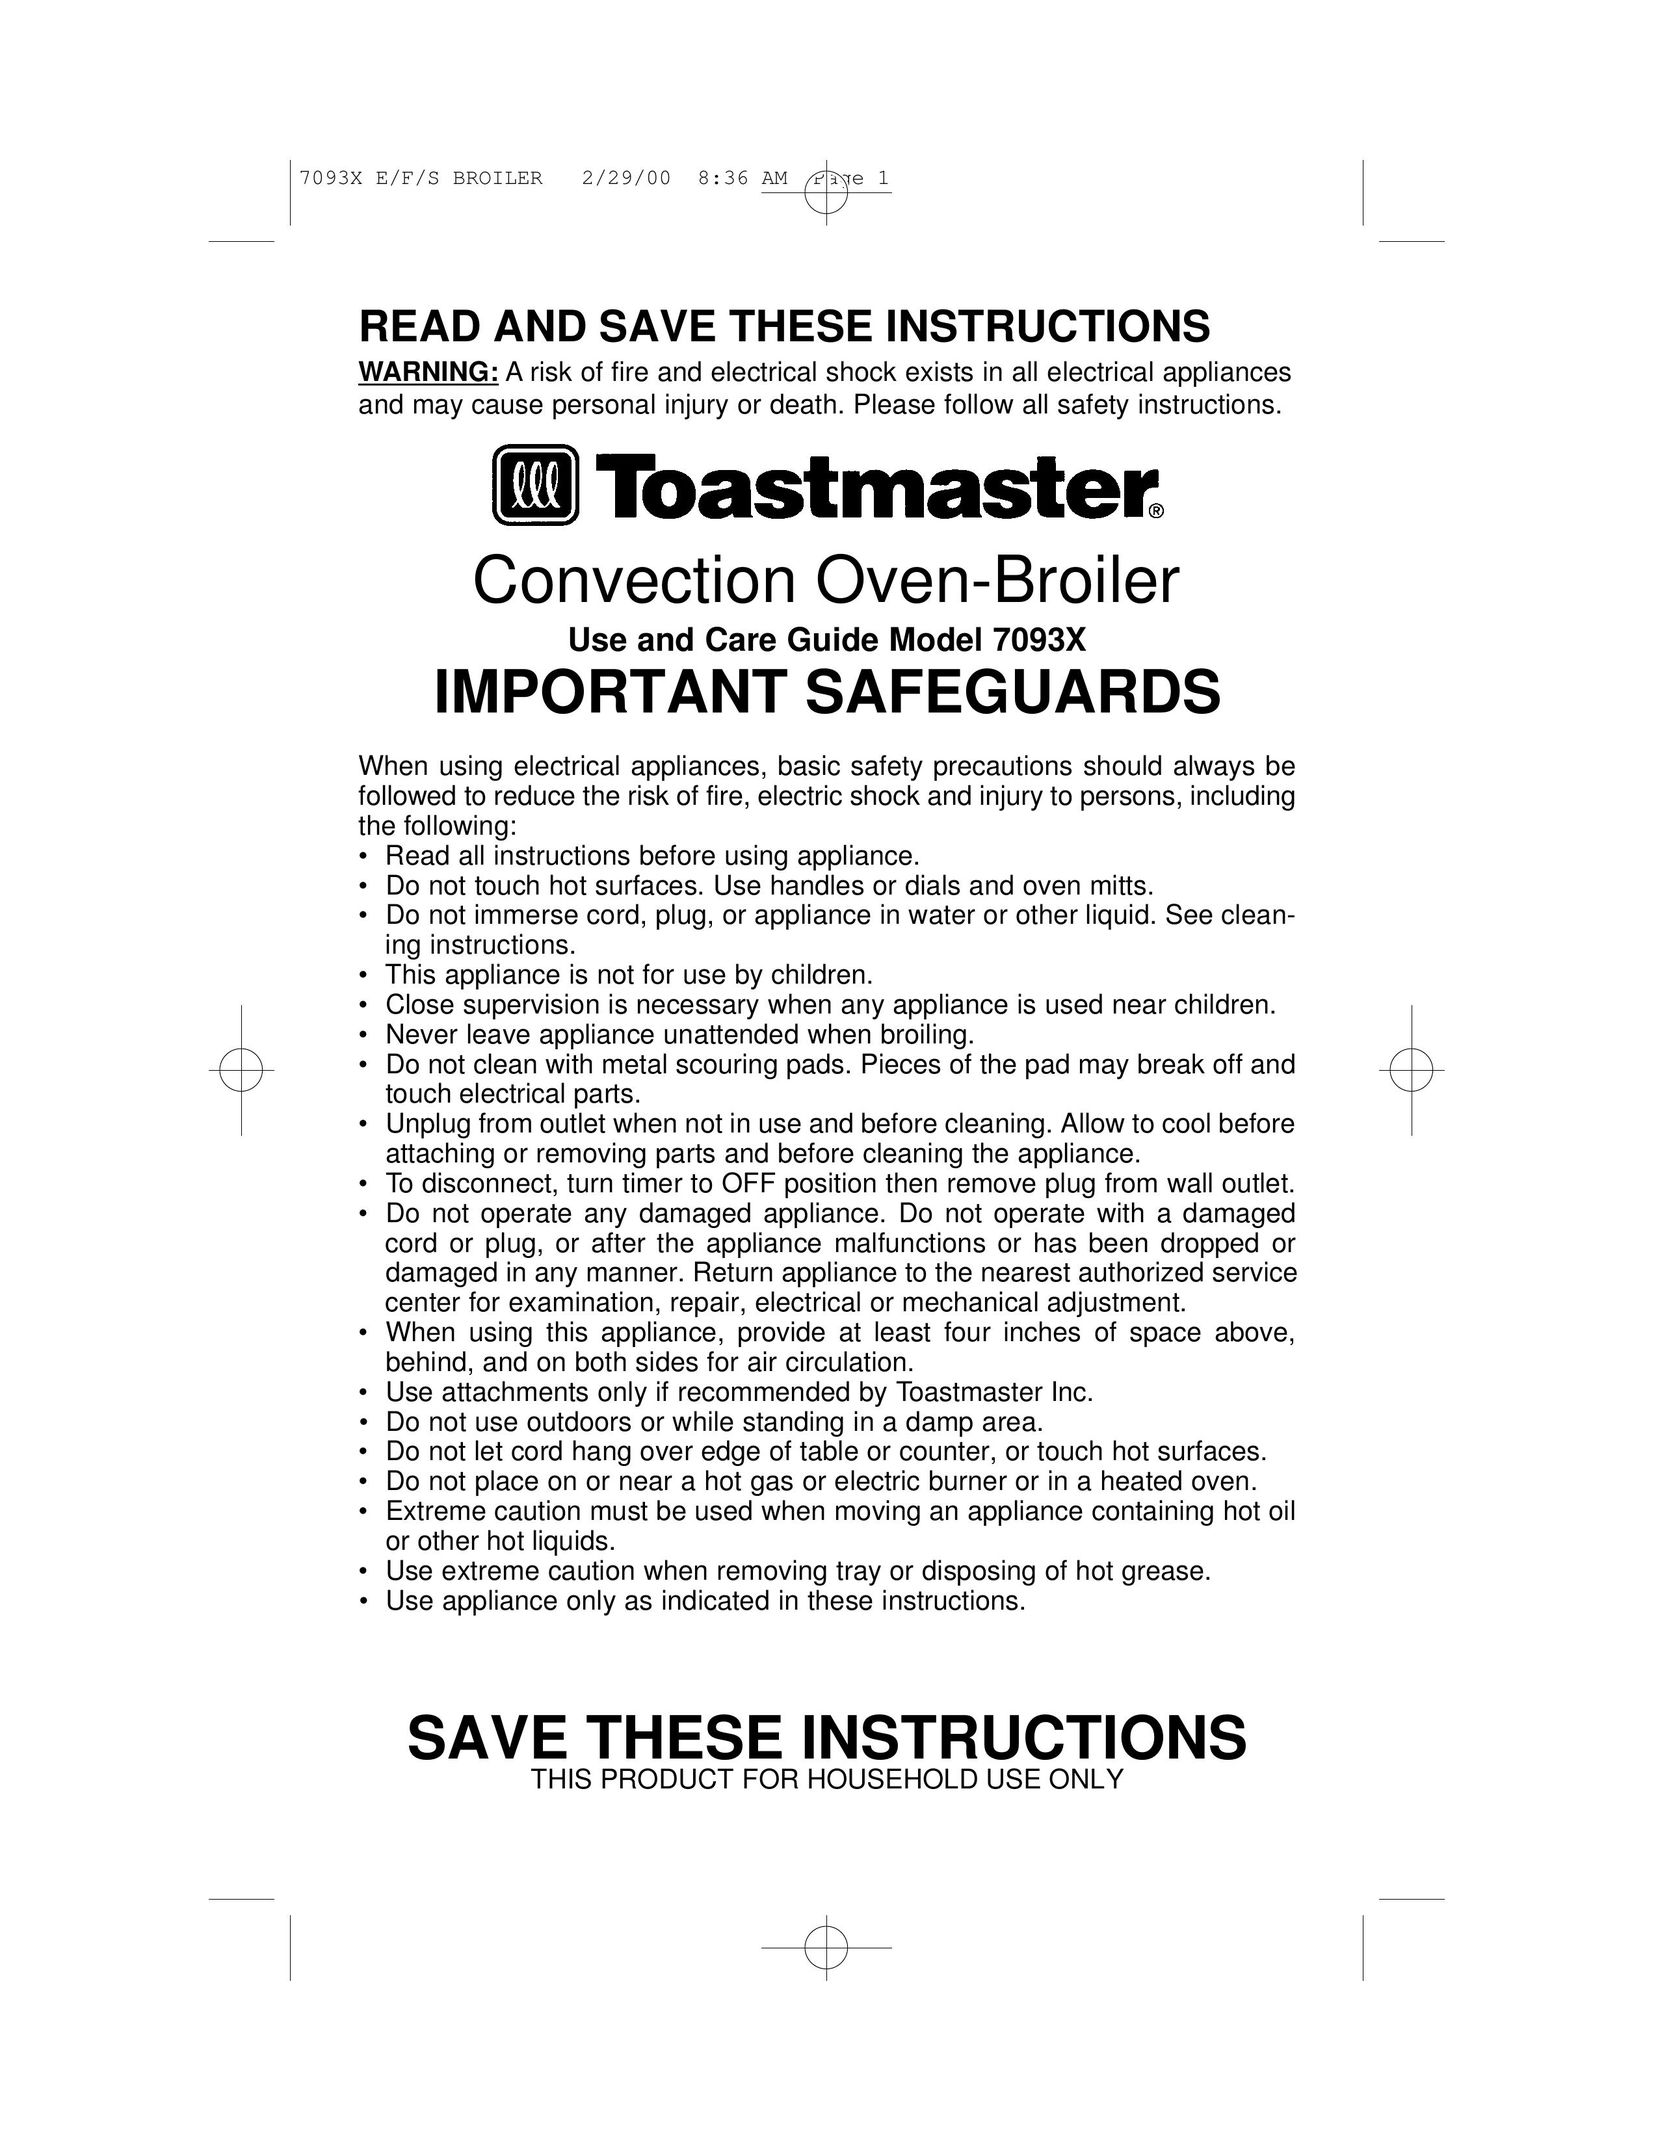 Toastmaster 7093X Convection Oven User Manual